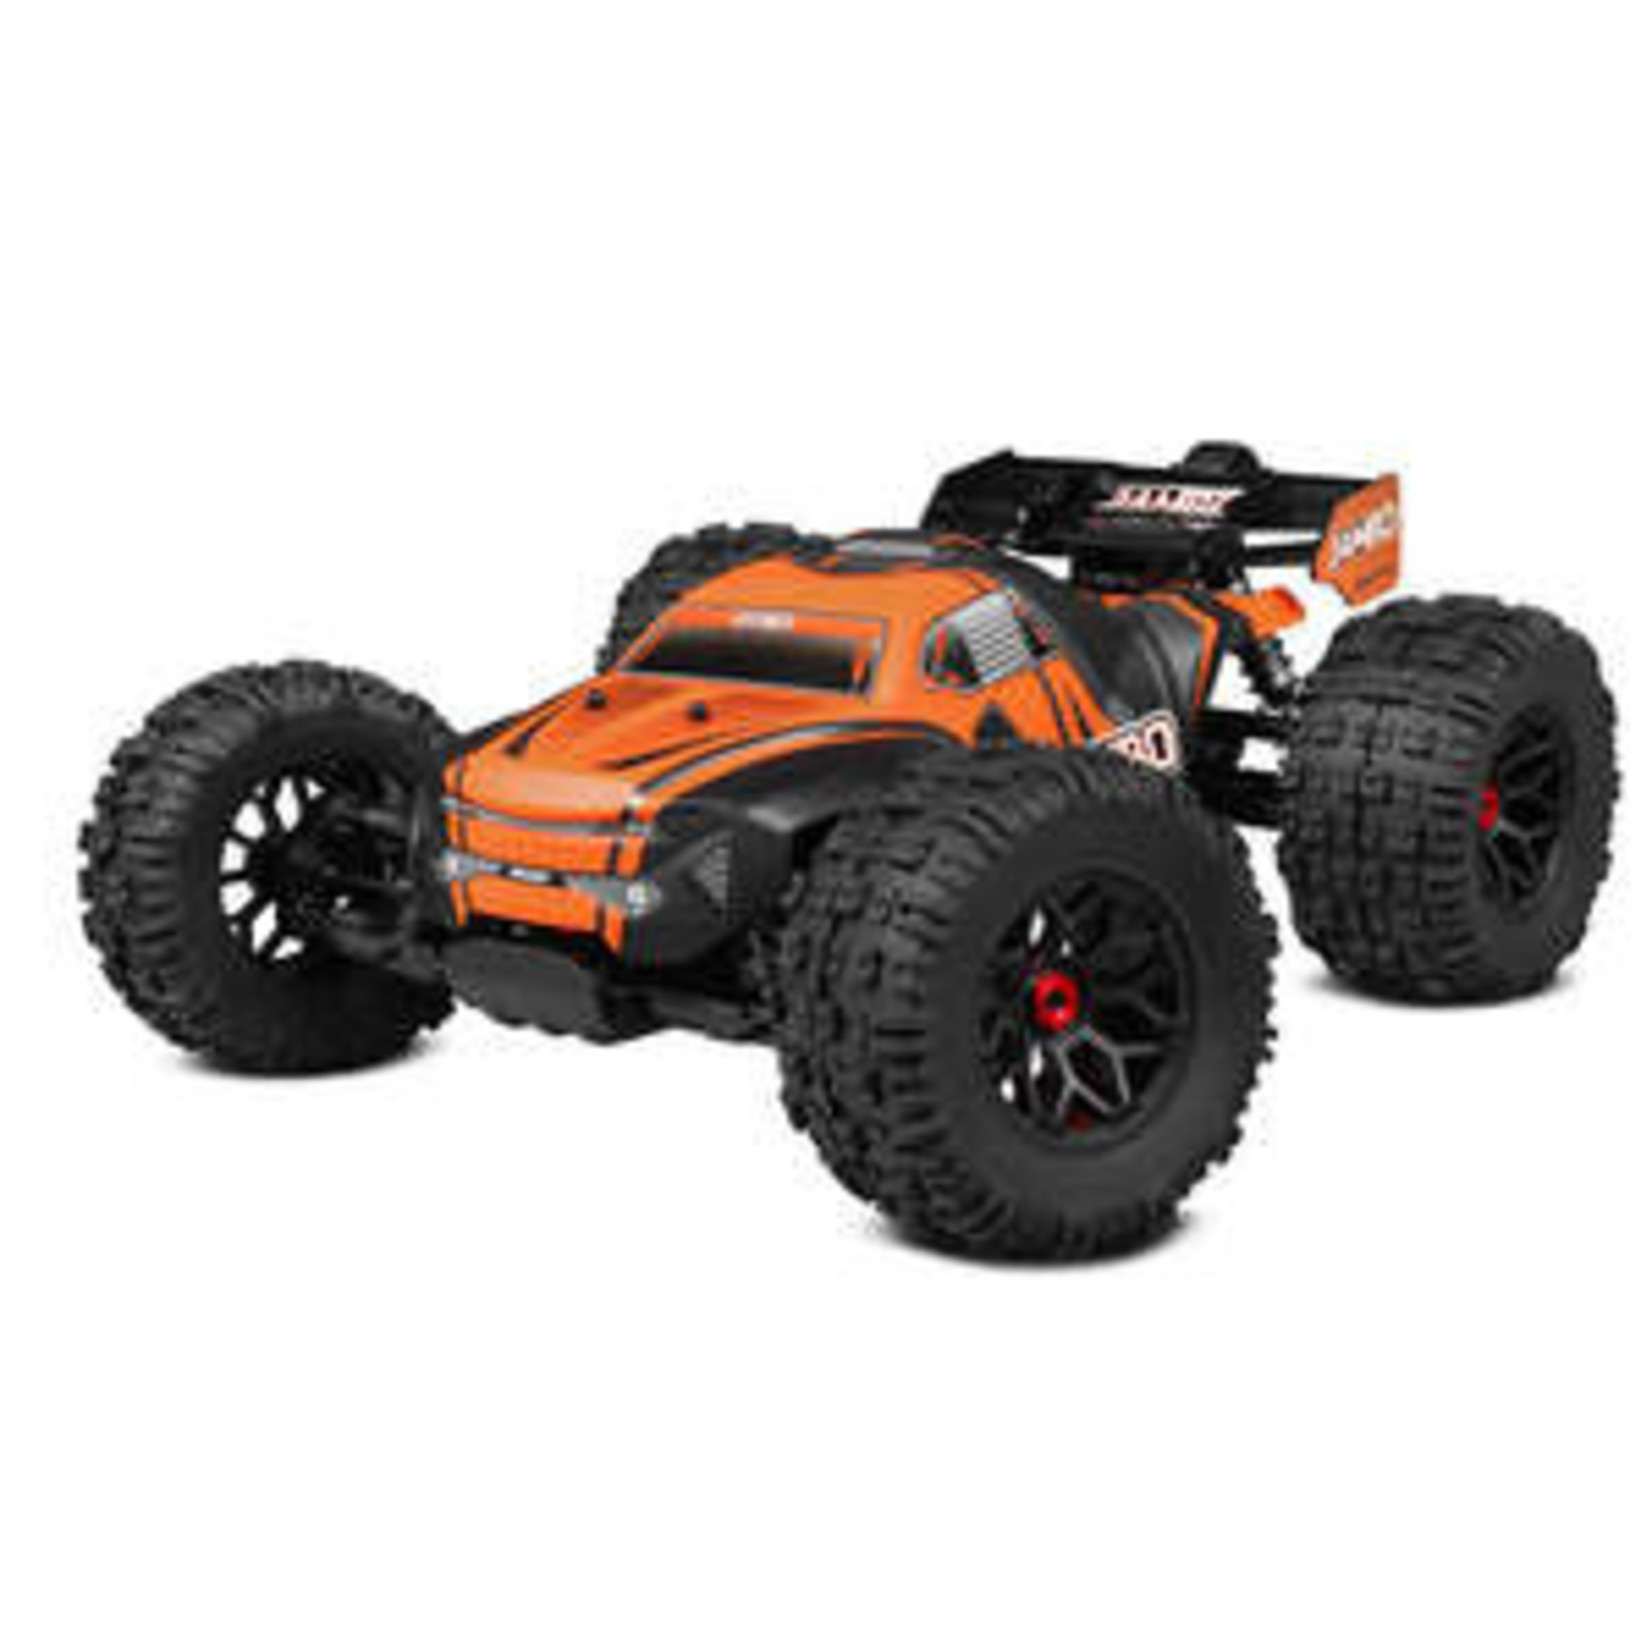 Corally (Team Corally) COR00166 Jambo XP 1/8 Monster Truck, SWB 4WD 6S Brushless RTR (Battery/Charger not included)